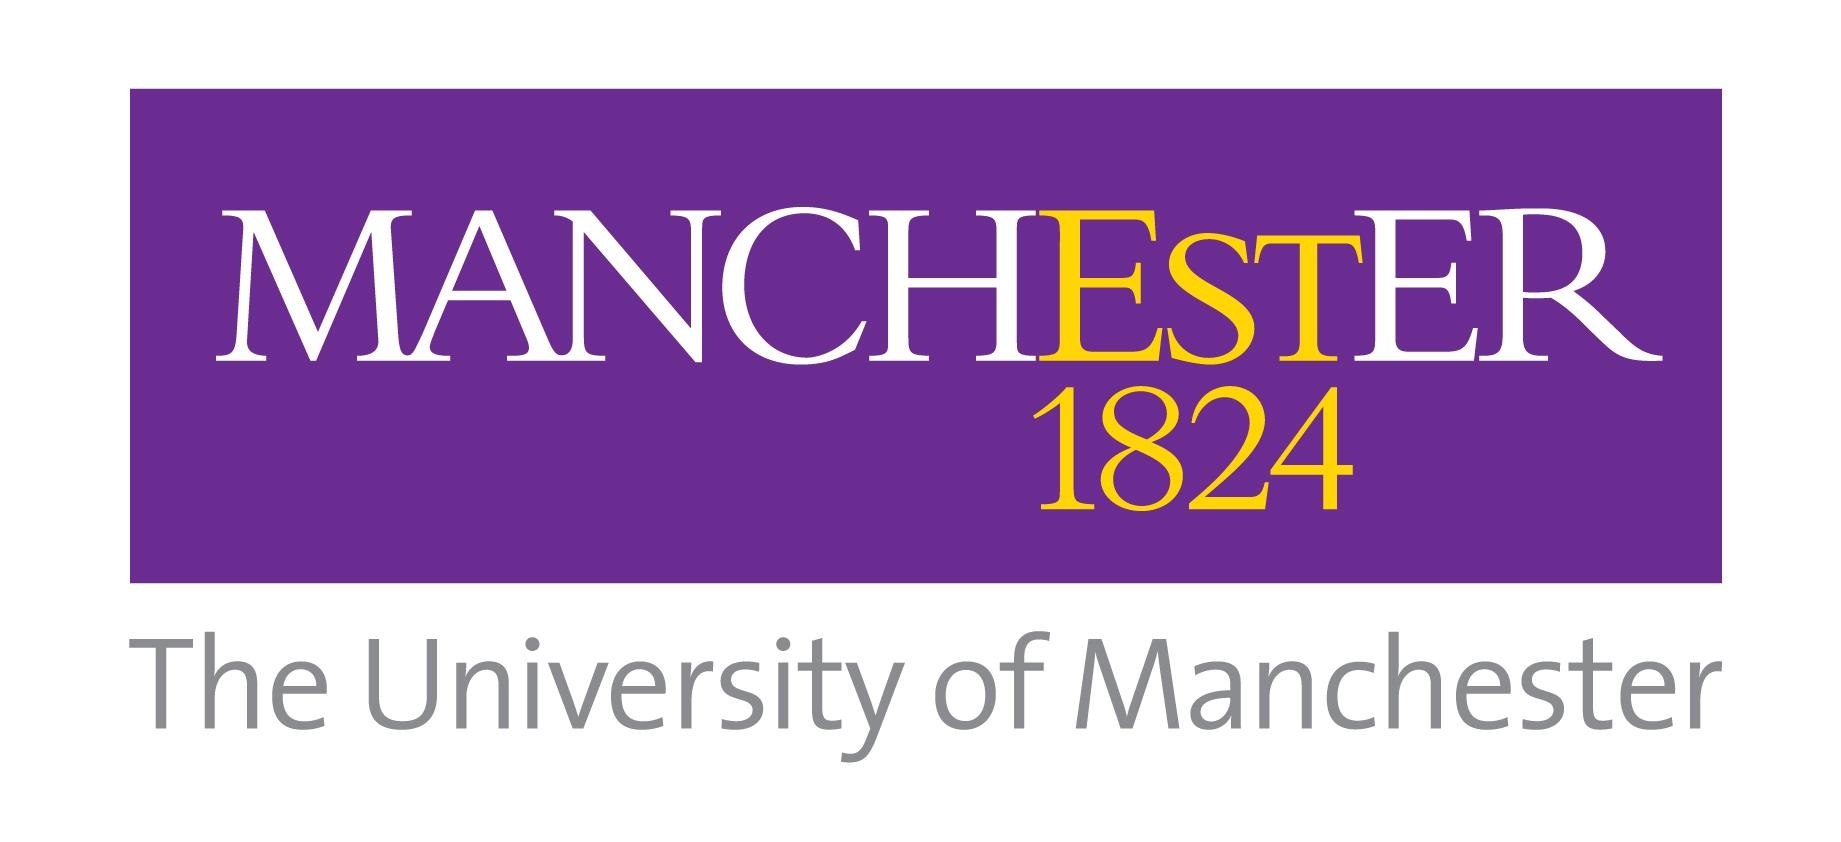 The University of Manchester Institute of Science and Technology